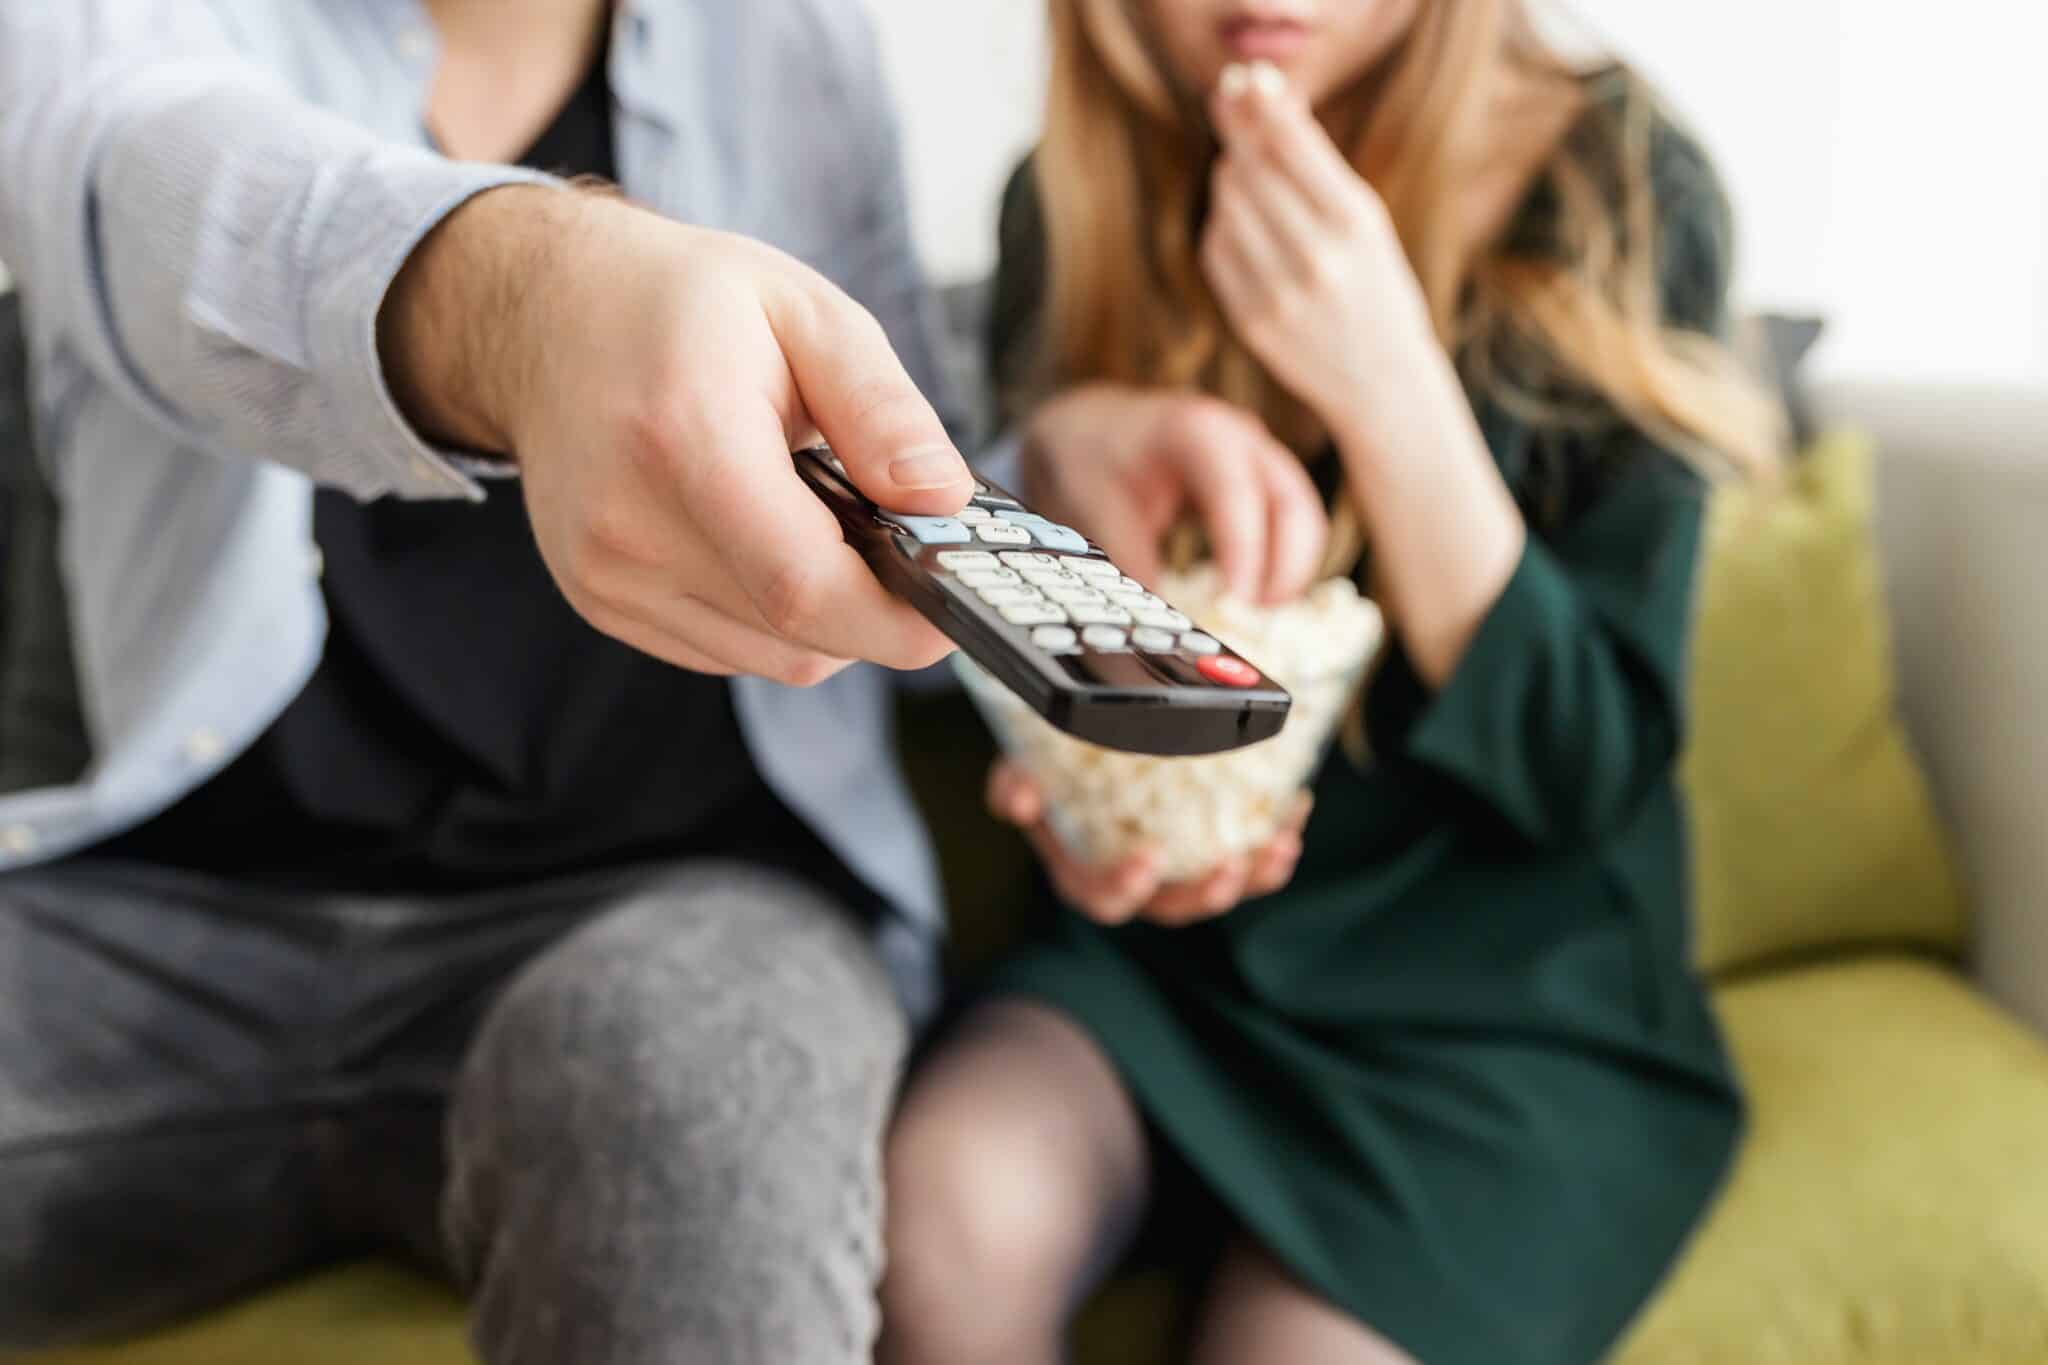 Couple watching TV at home with man pointing remote at the TV.